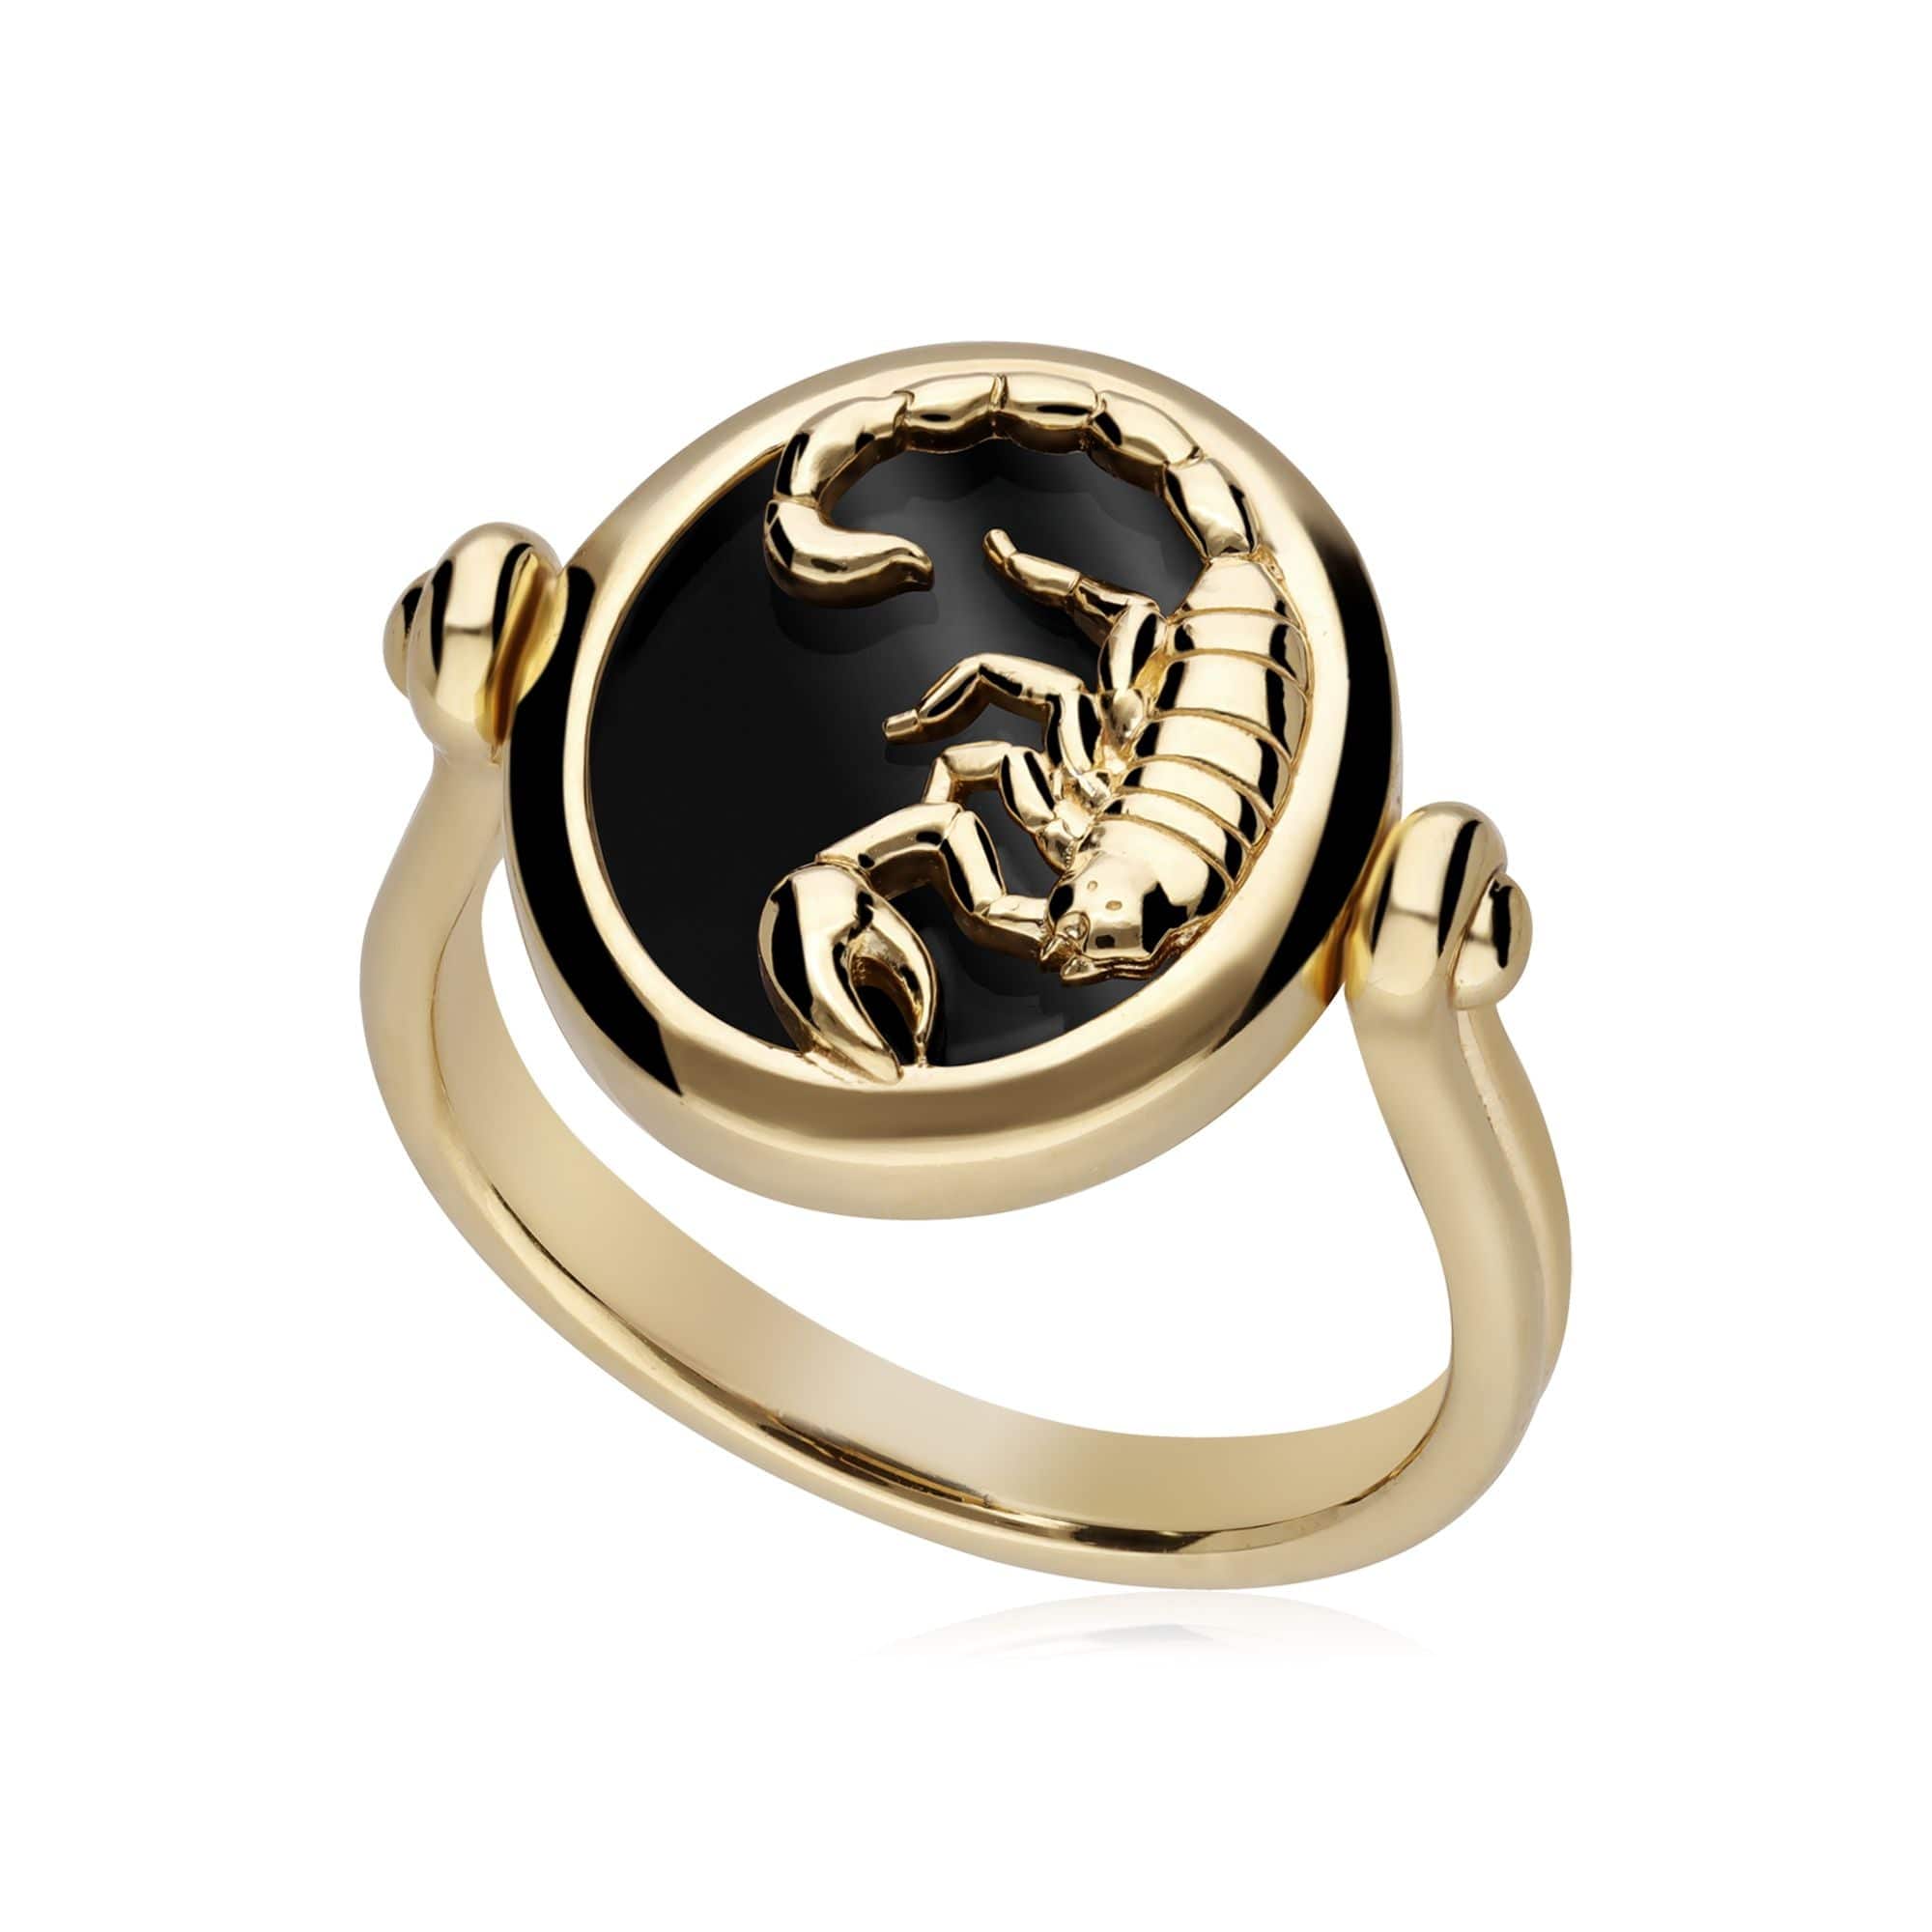 Icon Brand Jewellery | Sign Of The Times Signet Ring Gold - Mens ⋆  Drzubedatumbi